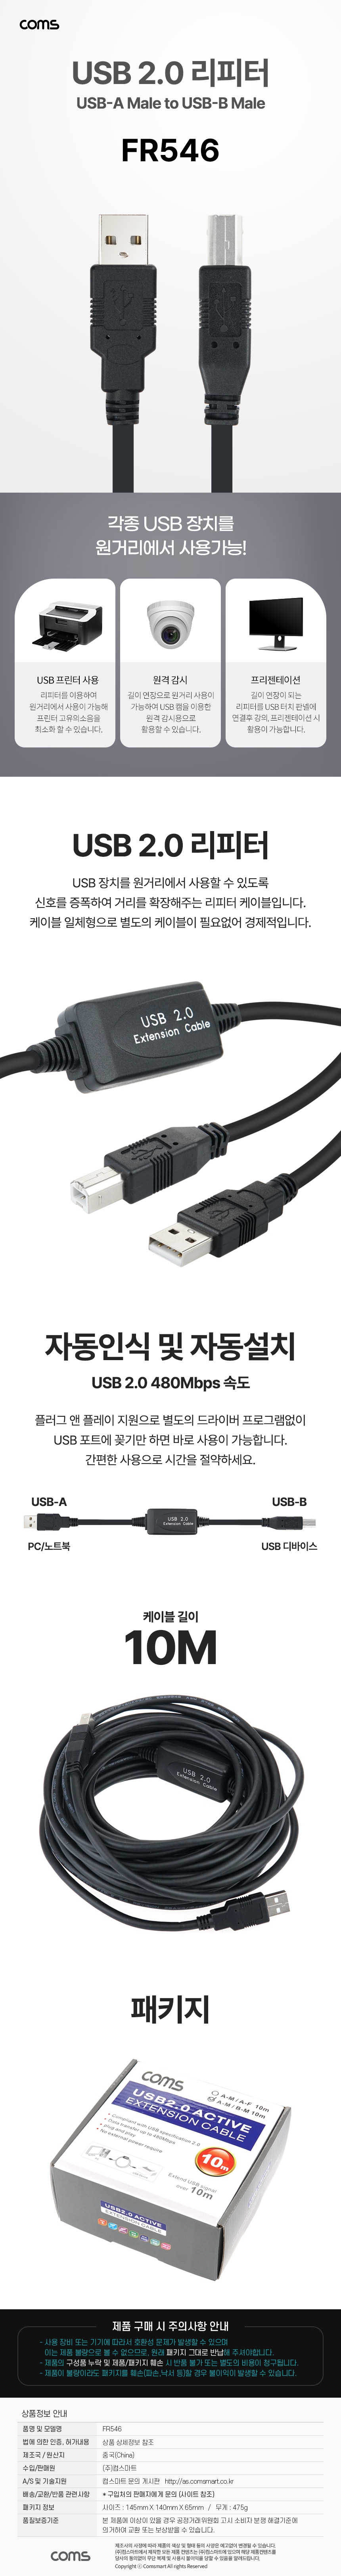 USB 2.0 리피터 케이블 무전원 Active Extension Cable